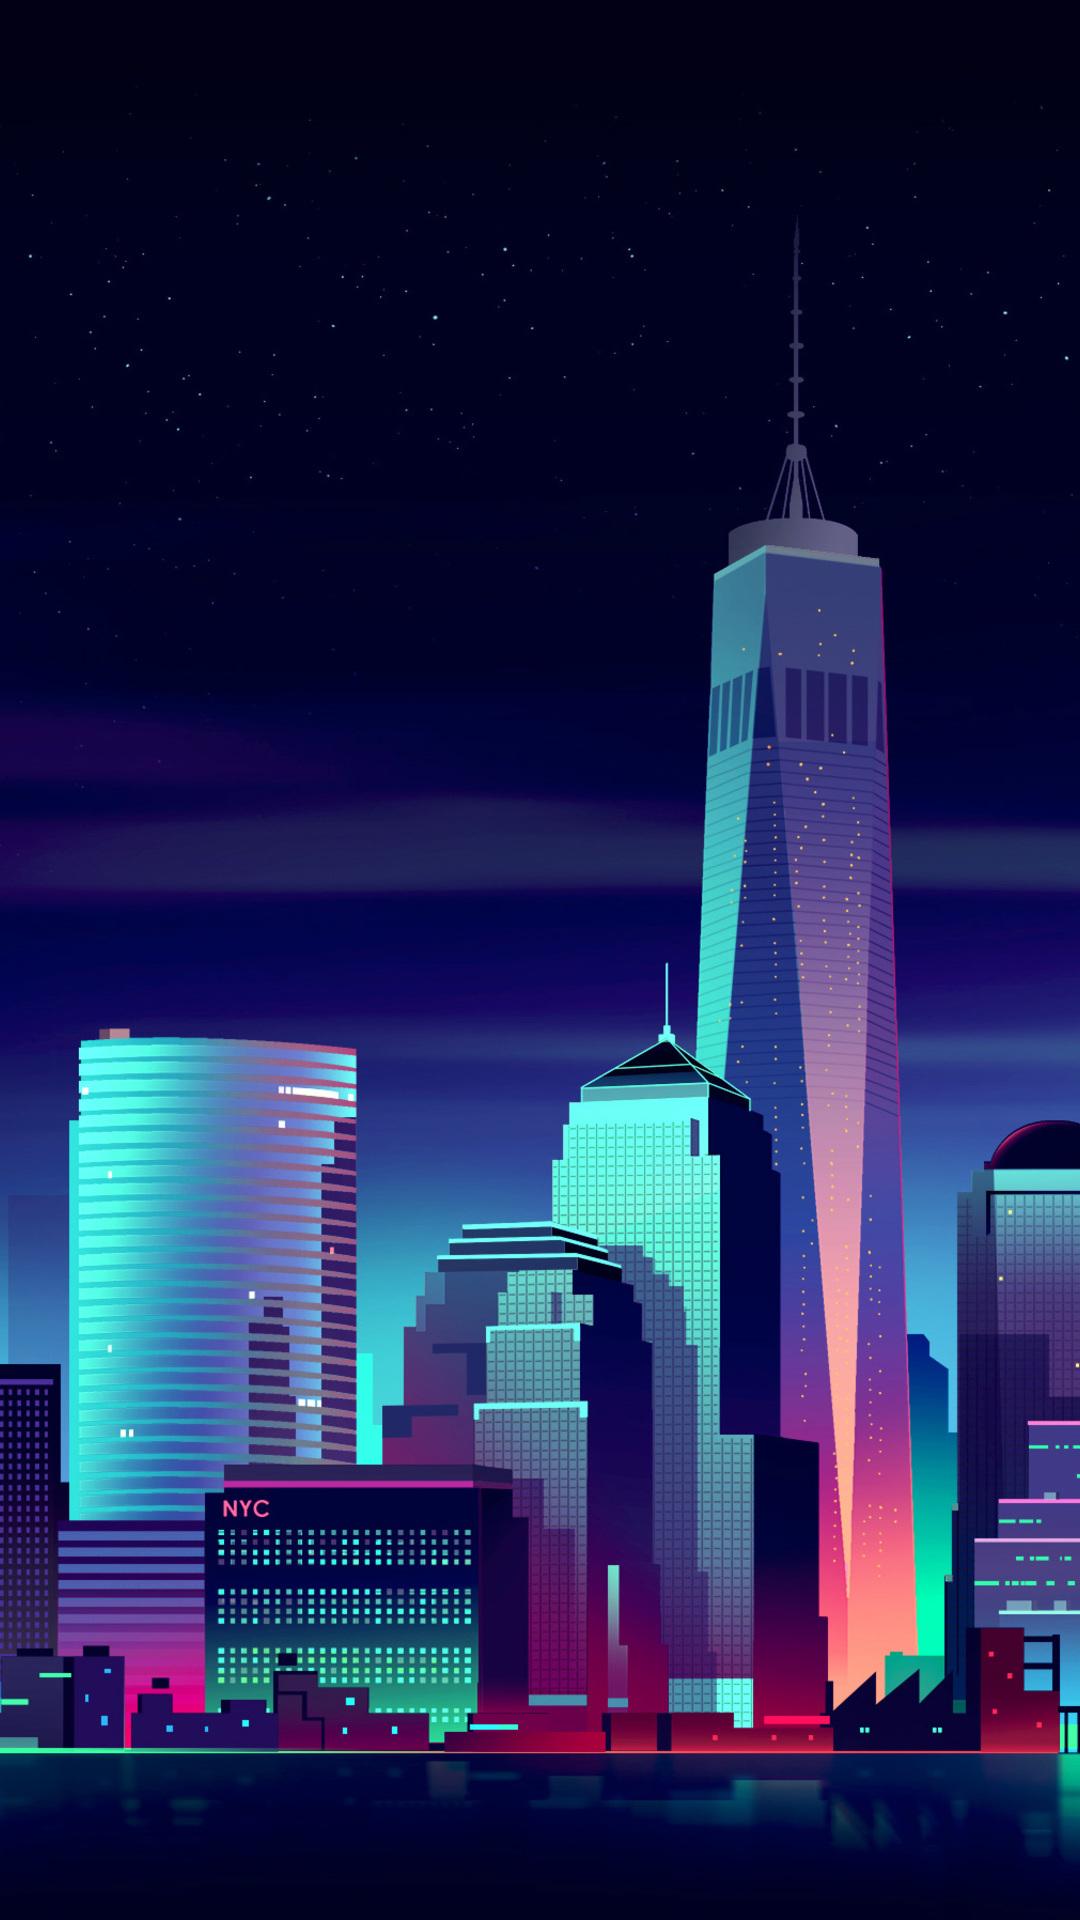 Any other pixel city night wallpaper like this one